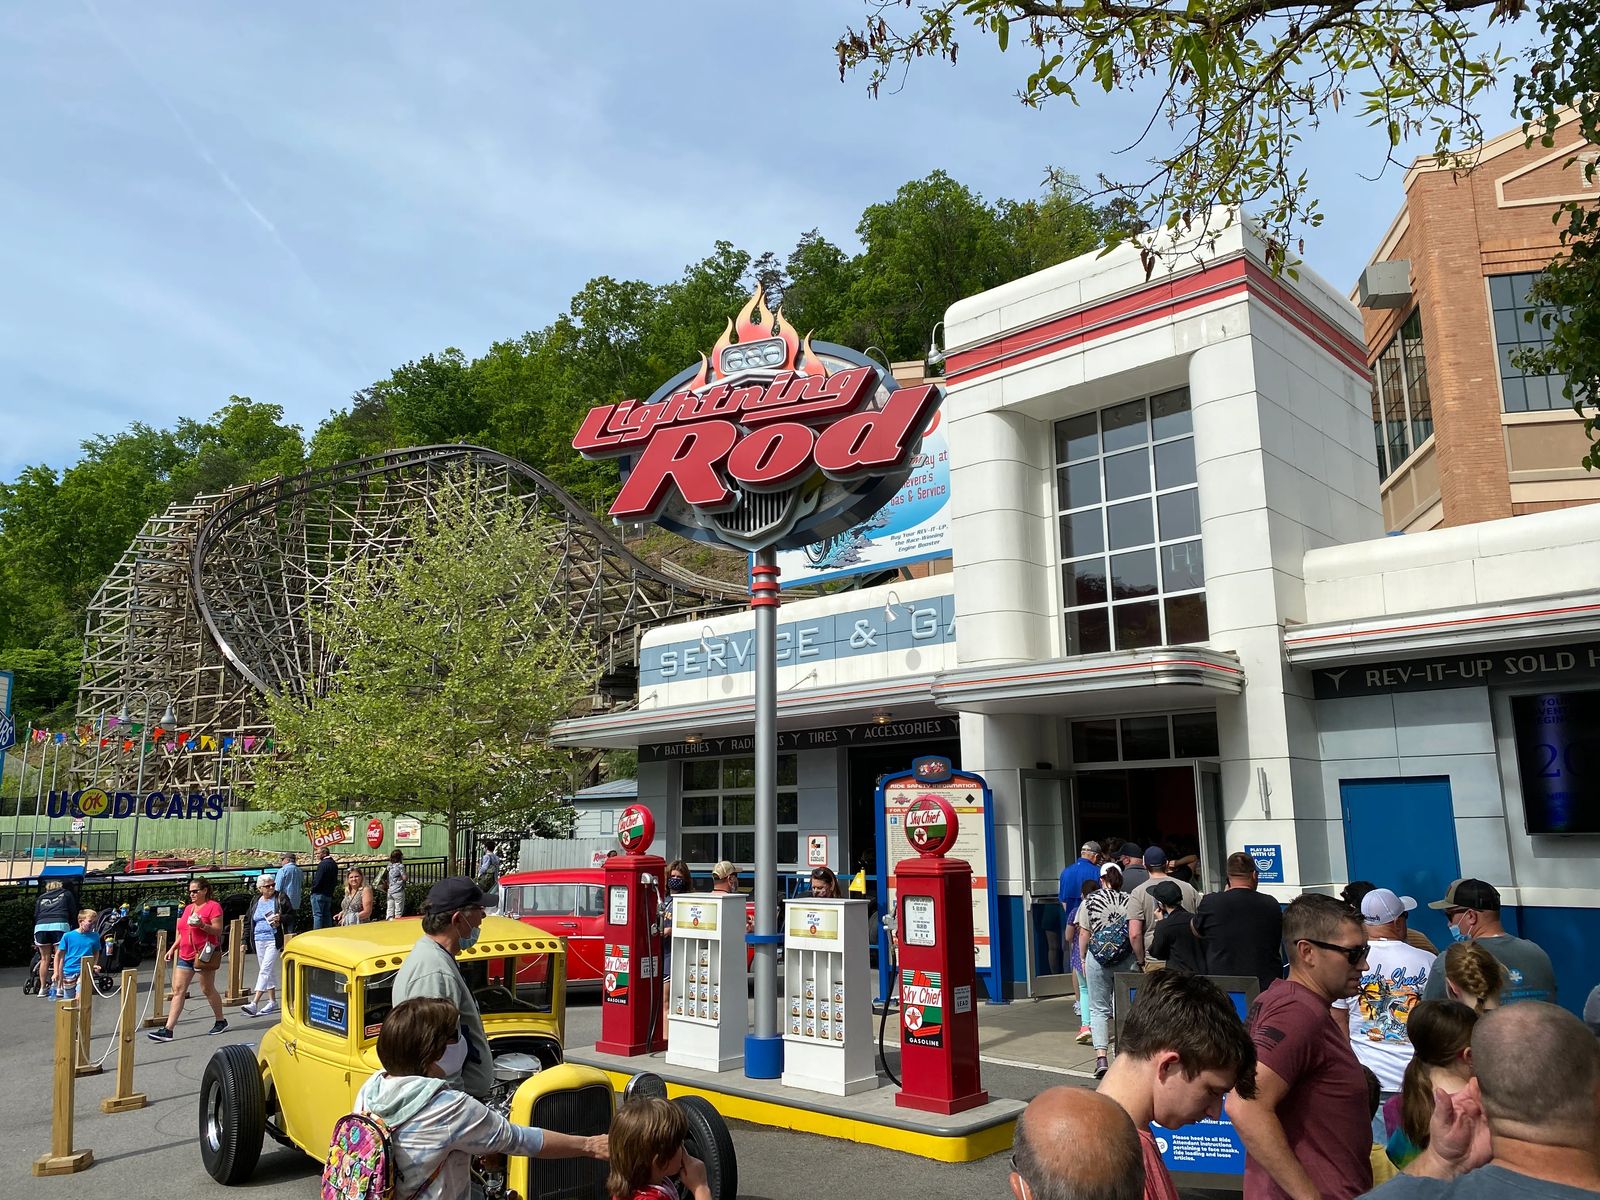 Lightning Rod wooden rollercoaster entrance with yellow 1920's car and a long line out the door, Guide to Dollywood